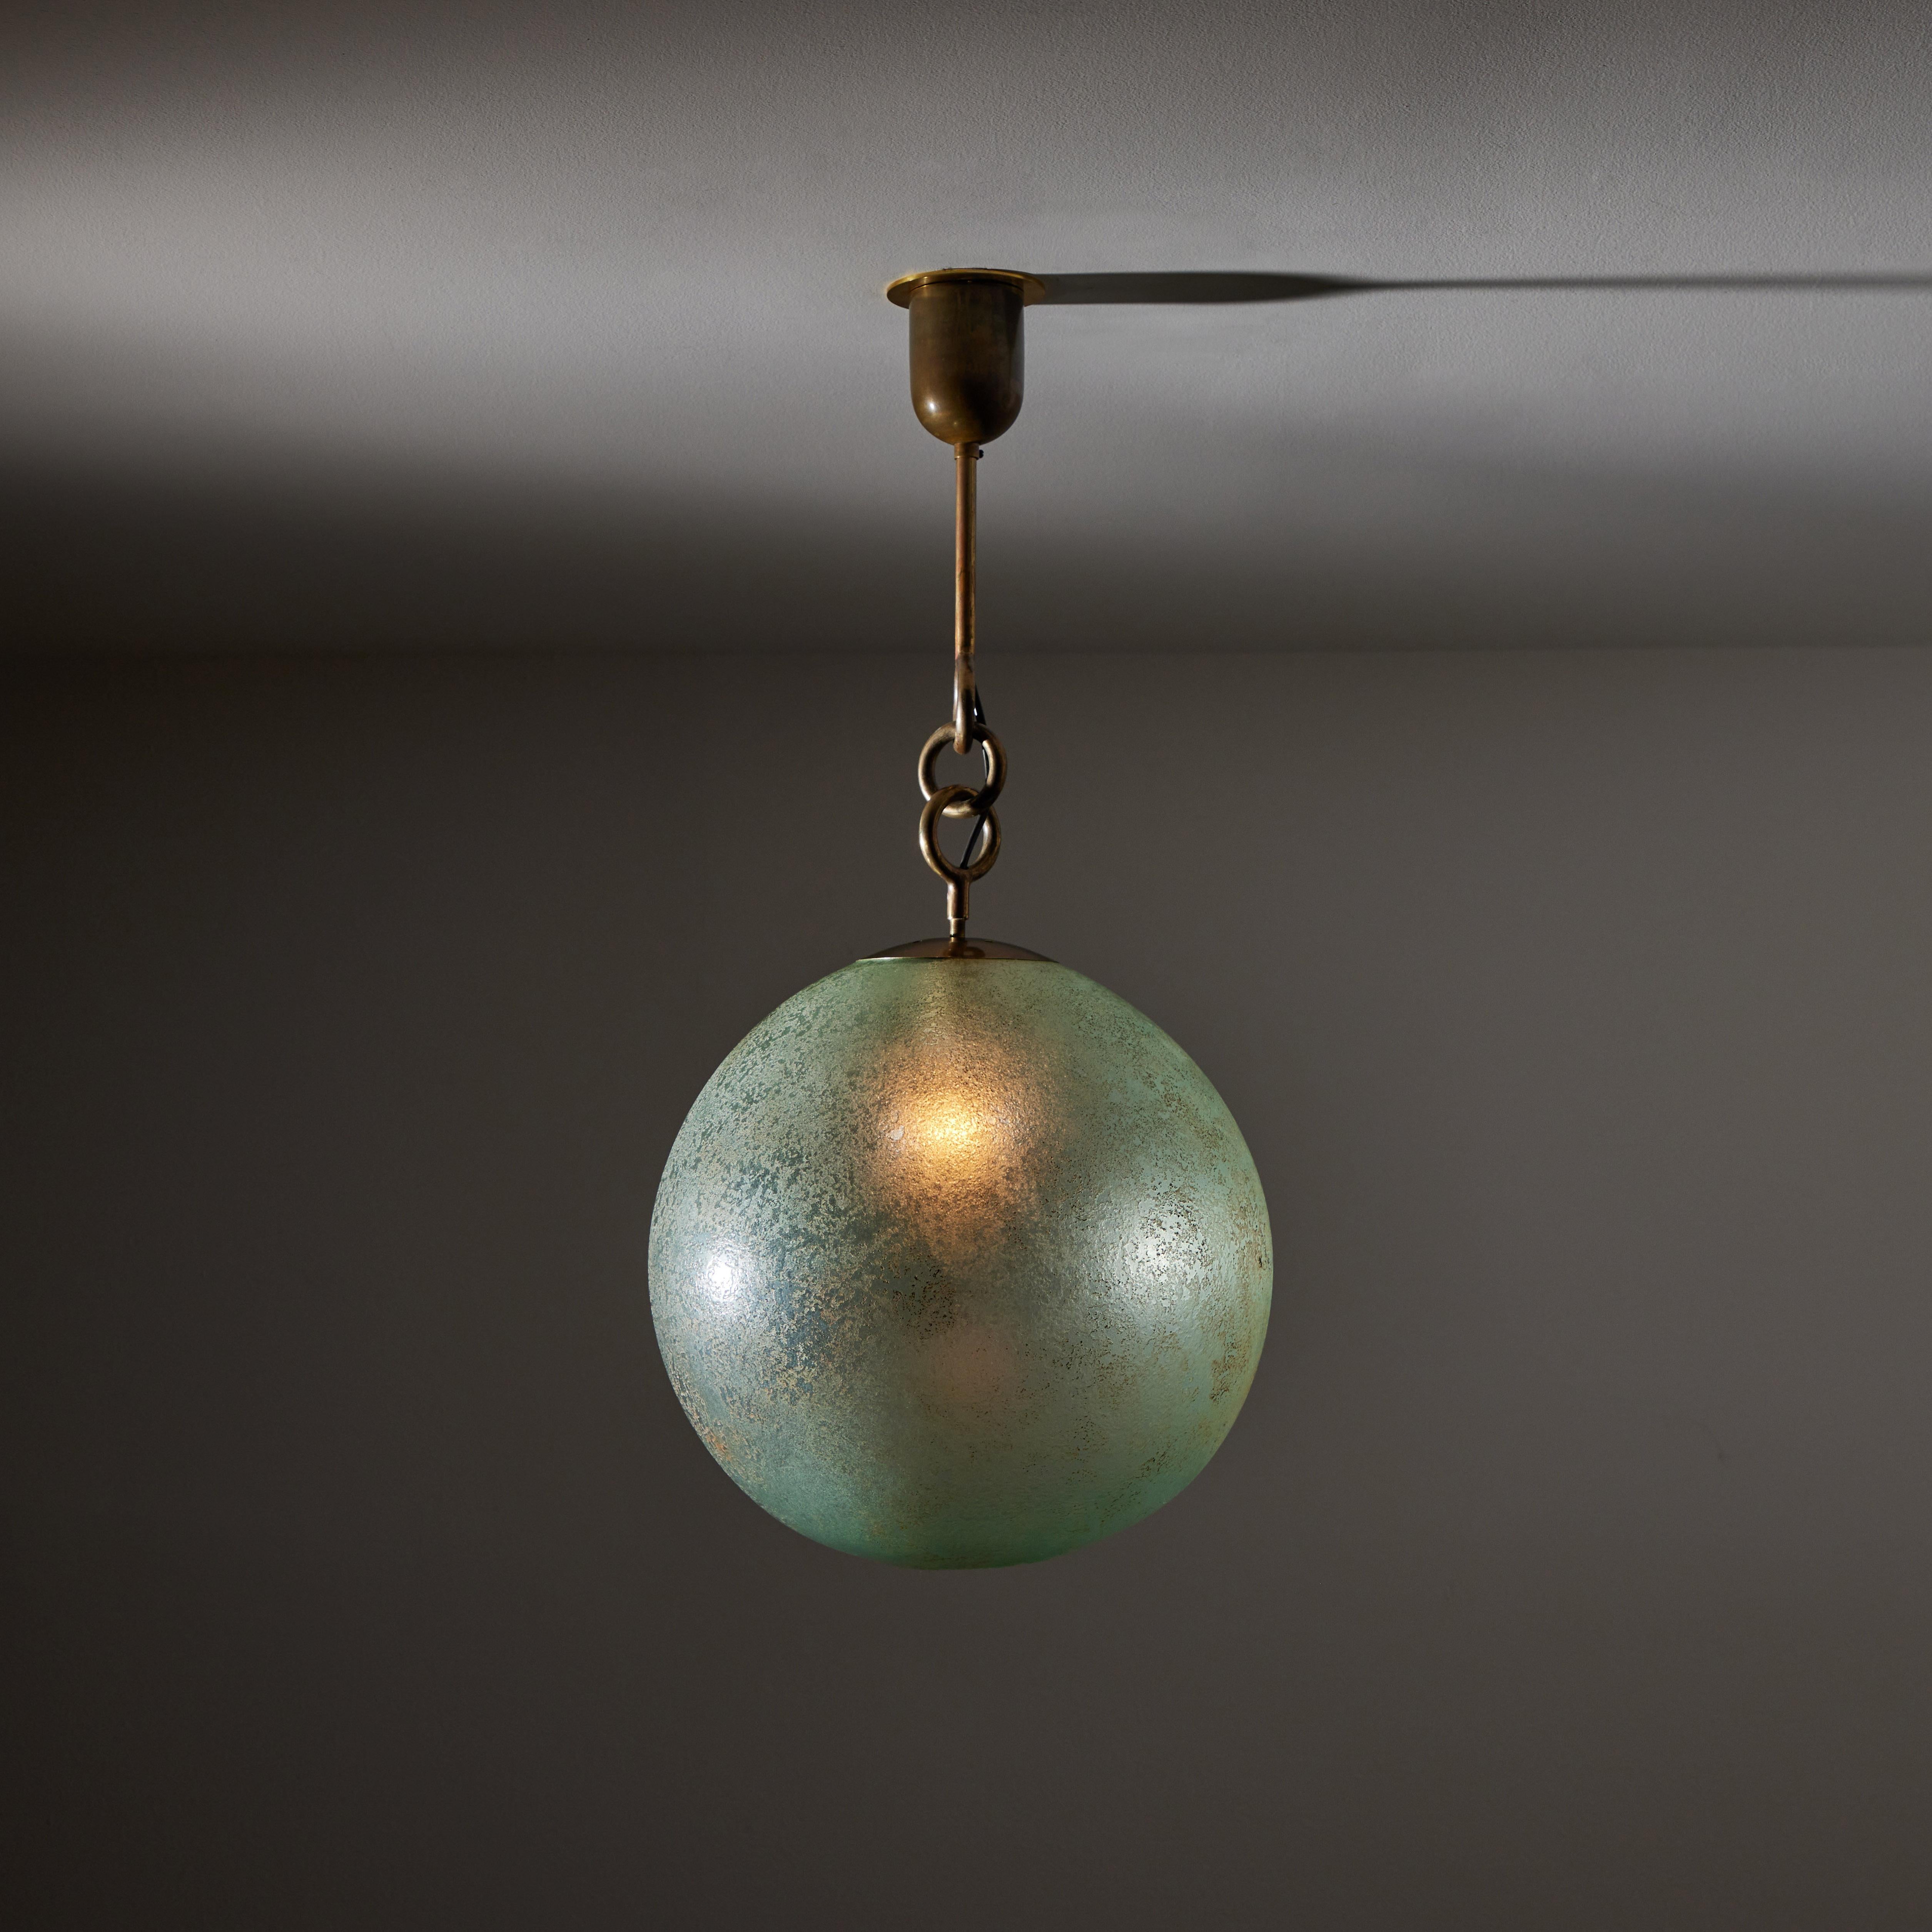 Pendant by Seguso. Designed and manufactured in Italy, circa 1940's. Hand blown Murano glass, brass. Original canopy, custom brass backplate. Wired for U.S. standards. We recommend one E27 60w maximum bulbs. Bulbs not included.